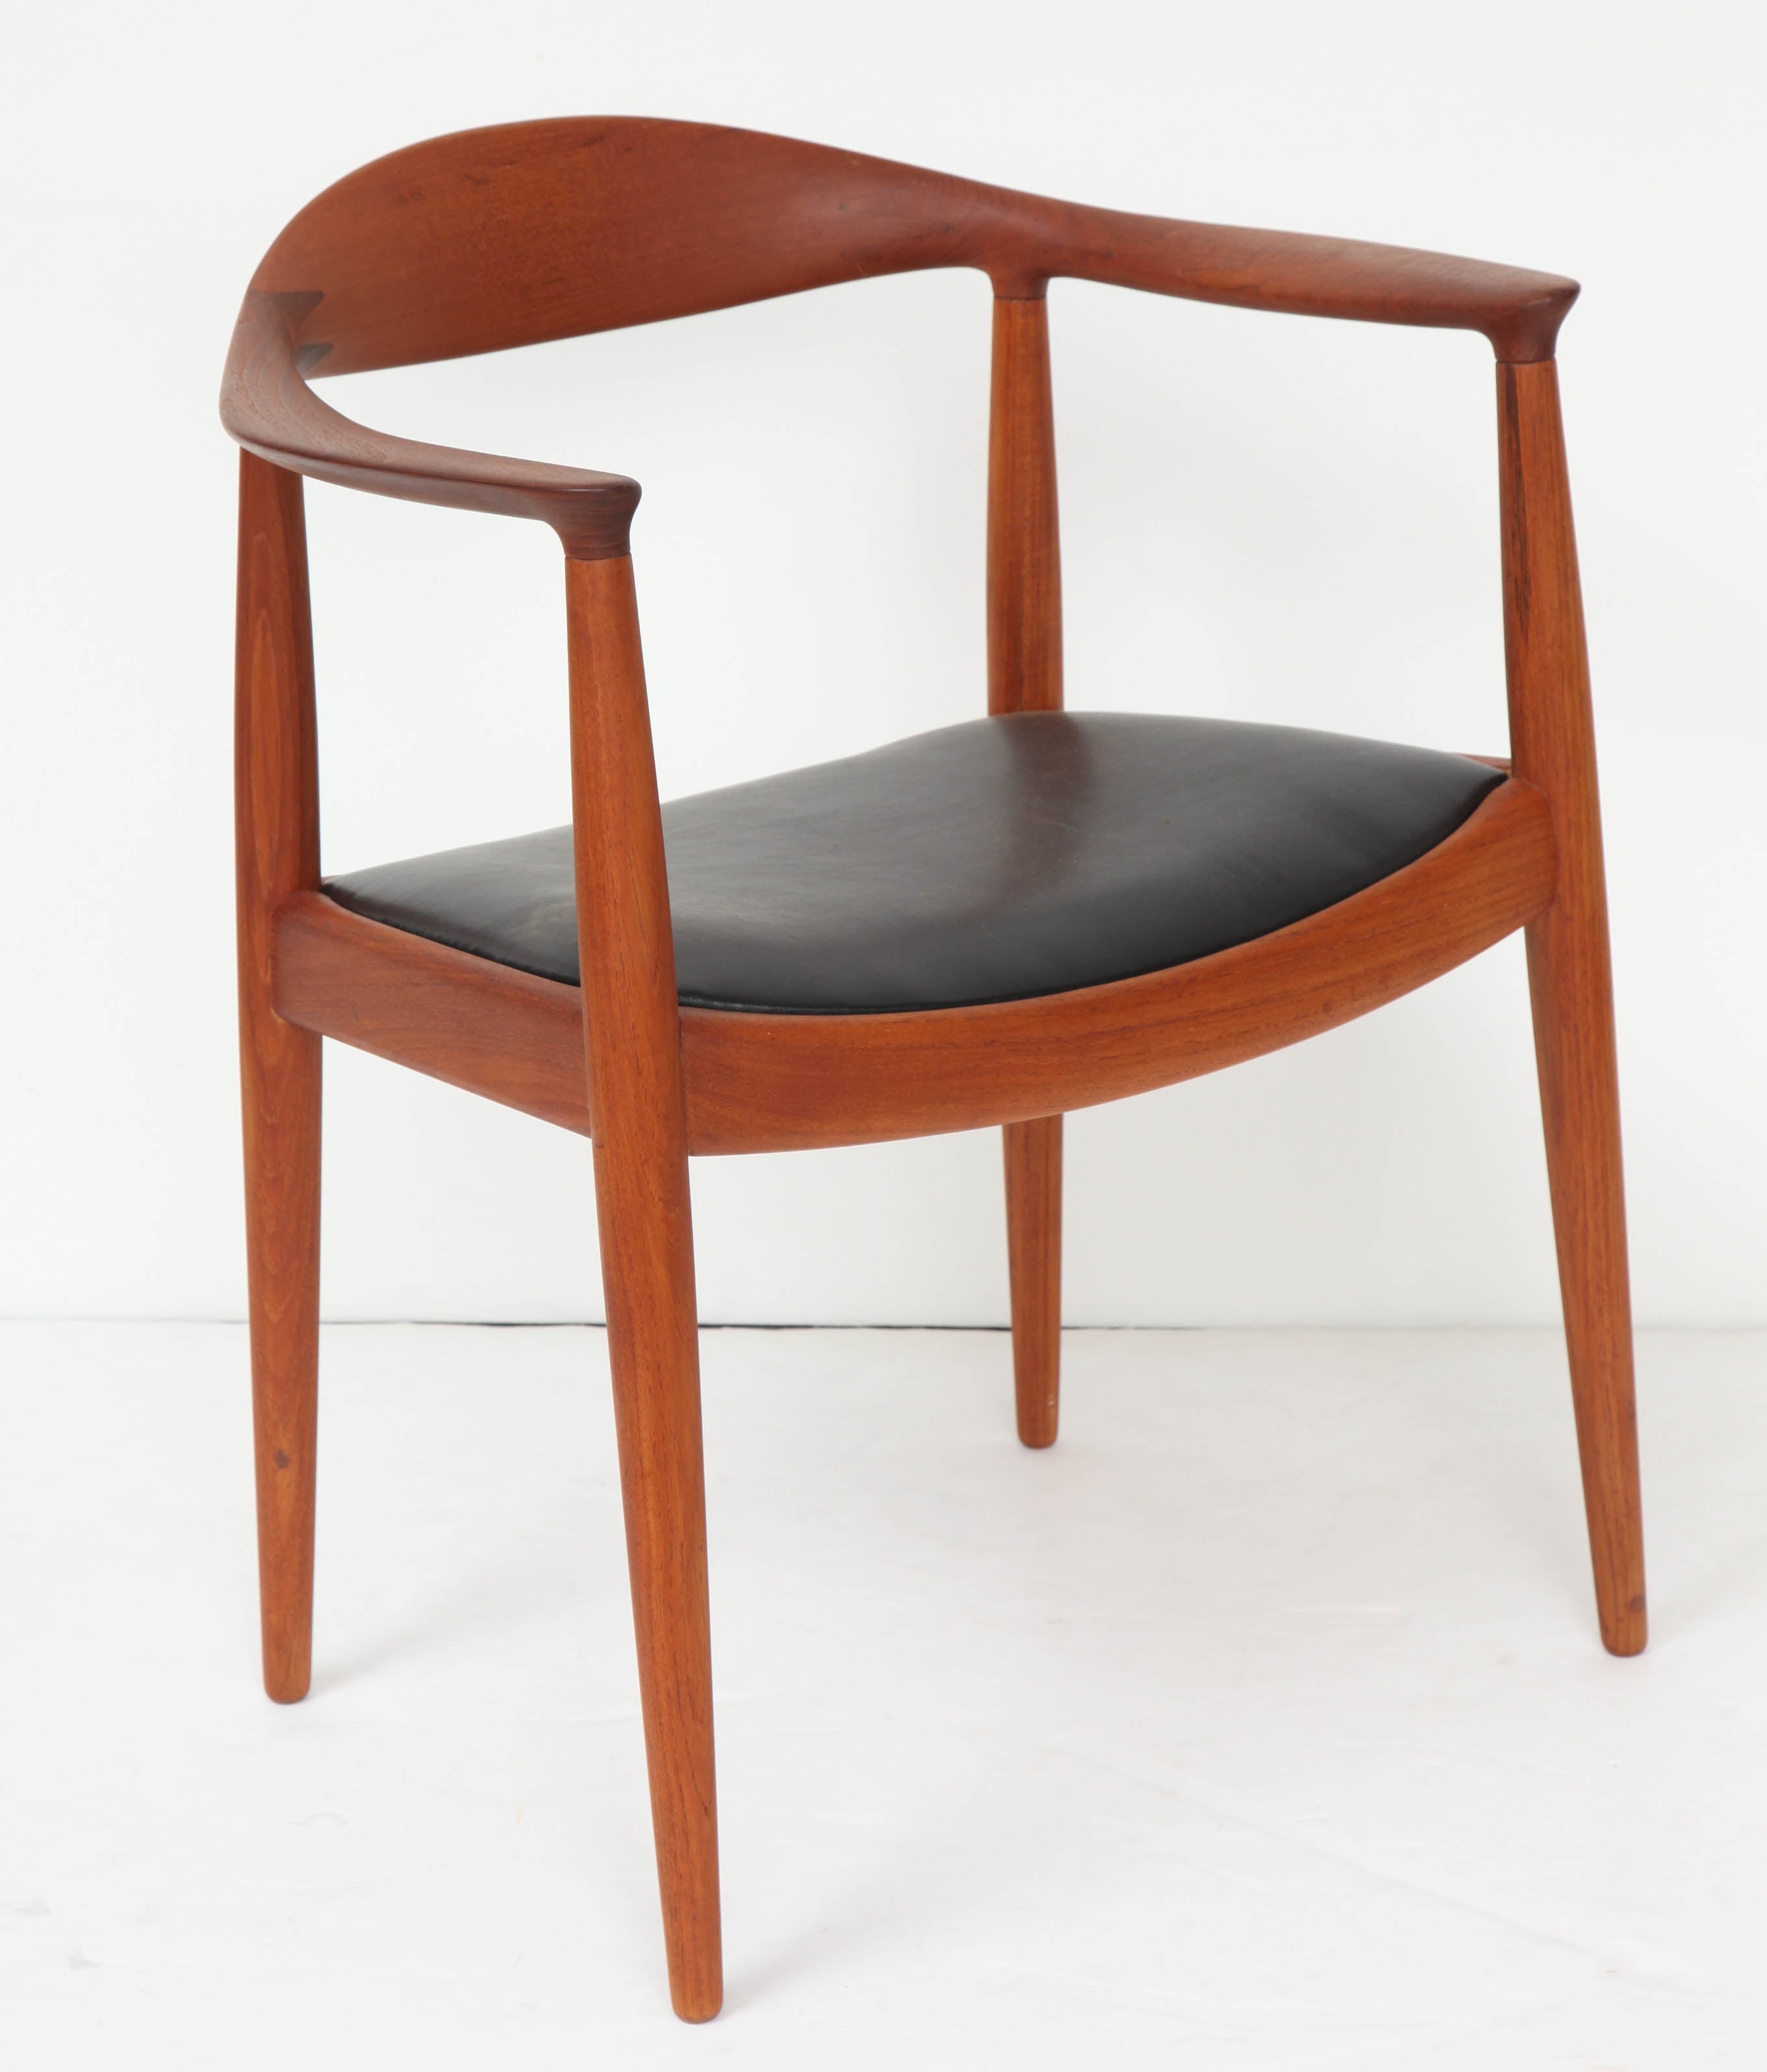 Solid teak frame with finger joint connections on back with black leather seat.  Marked JH.